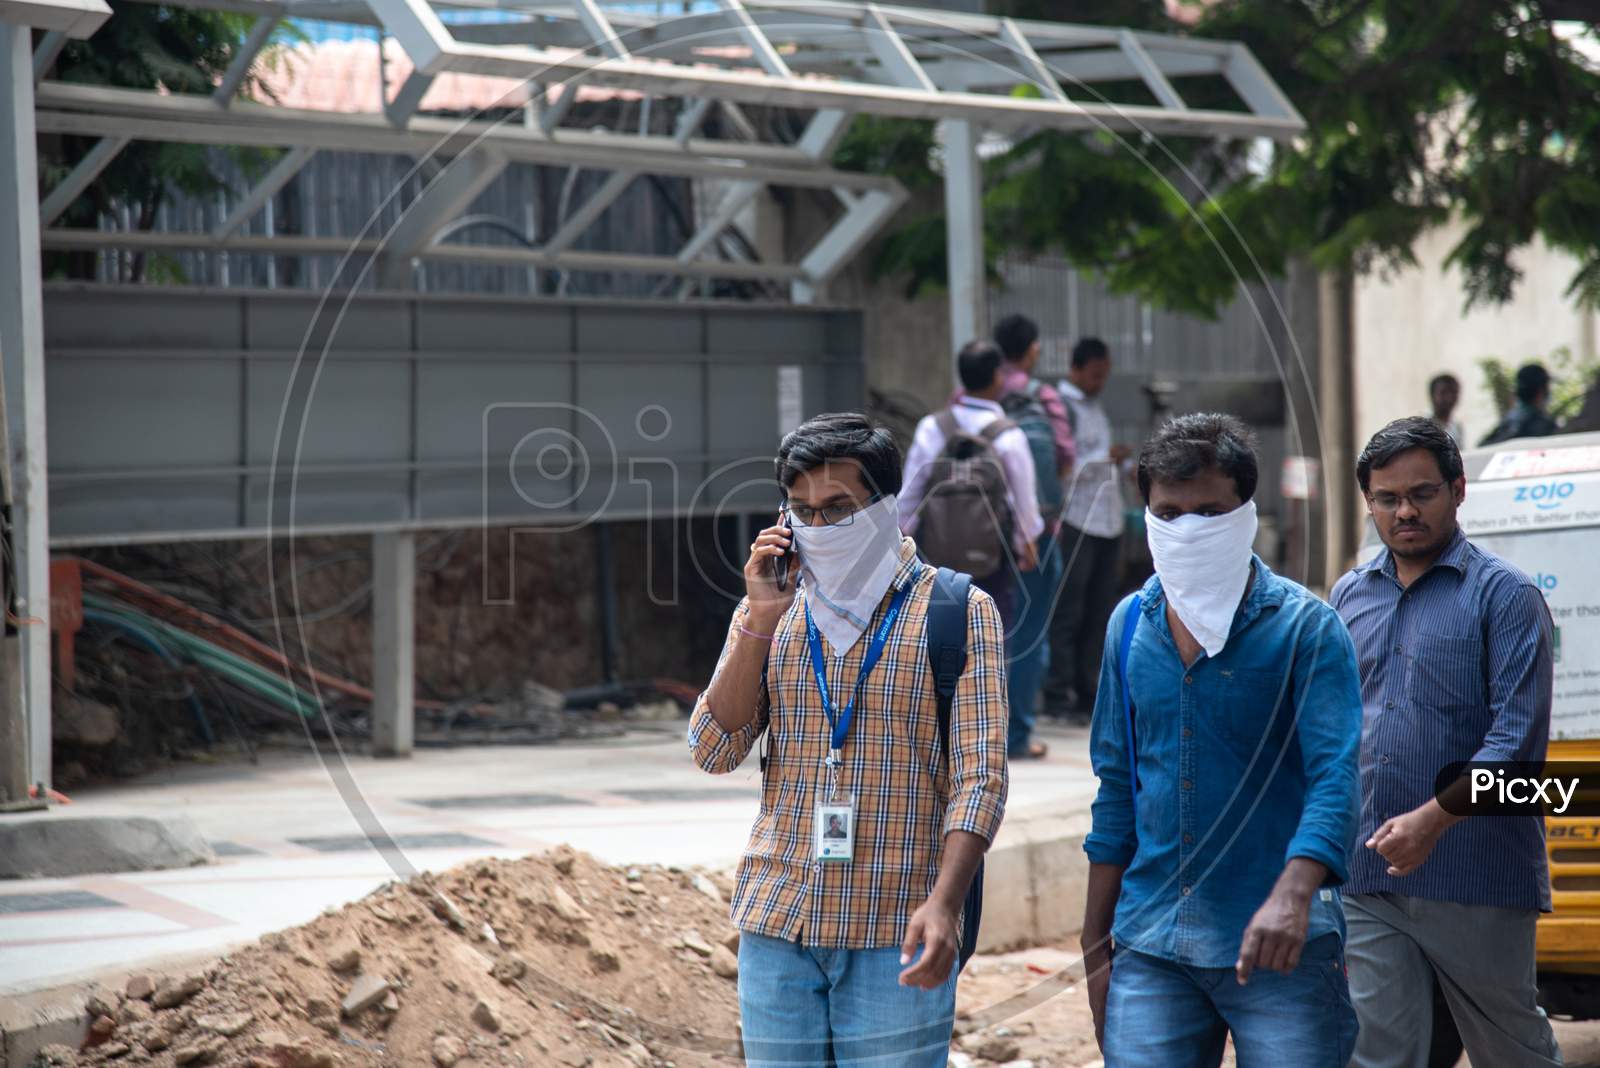 IT Employes use kerchief as a preventive measure from getting infected from CO-VID19, Corona Virus and started to evacuate Raheja Mindspace Campus as they were asked to evacuate the campus